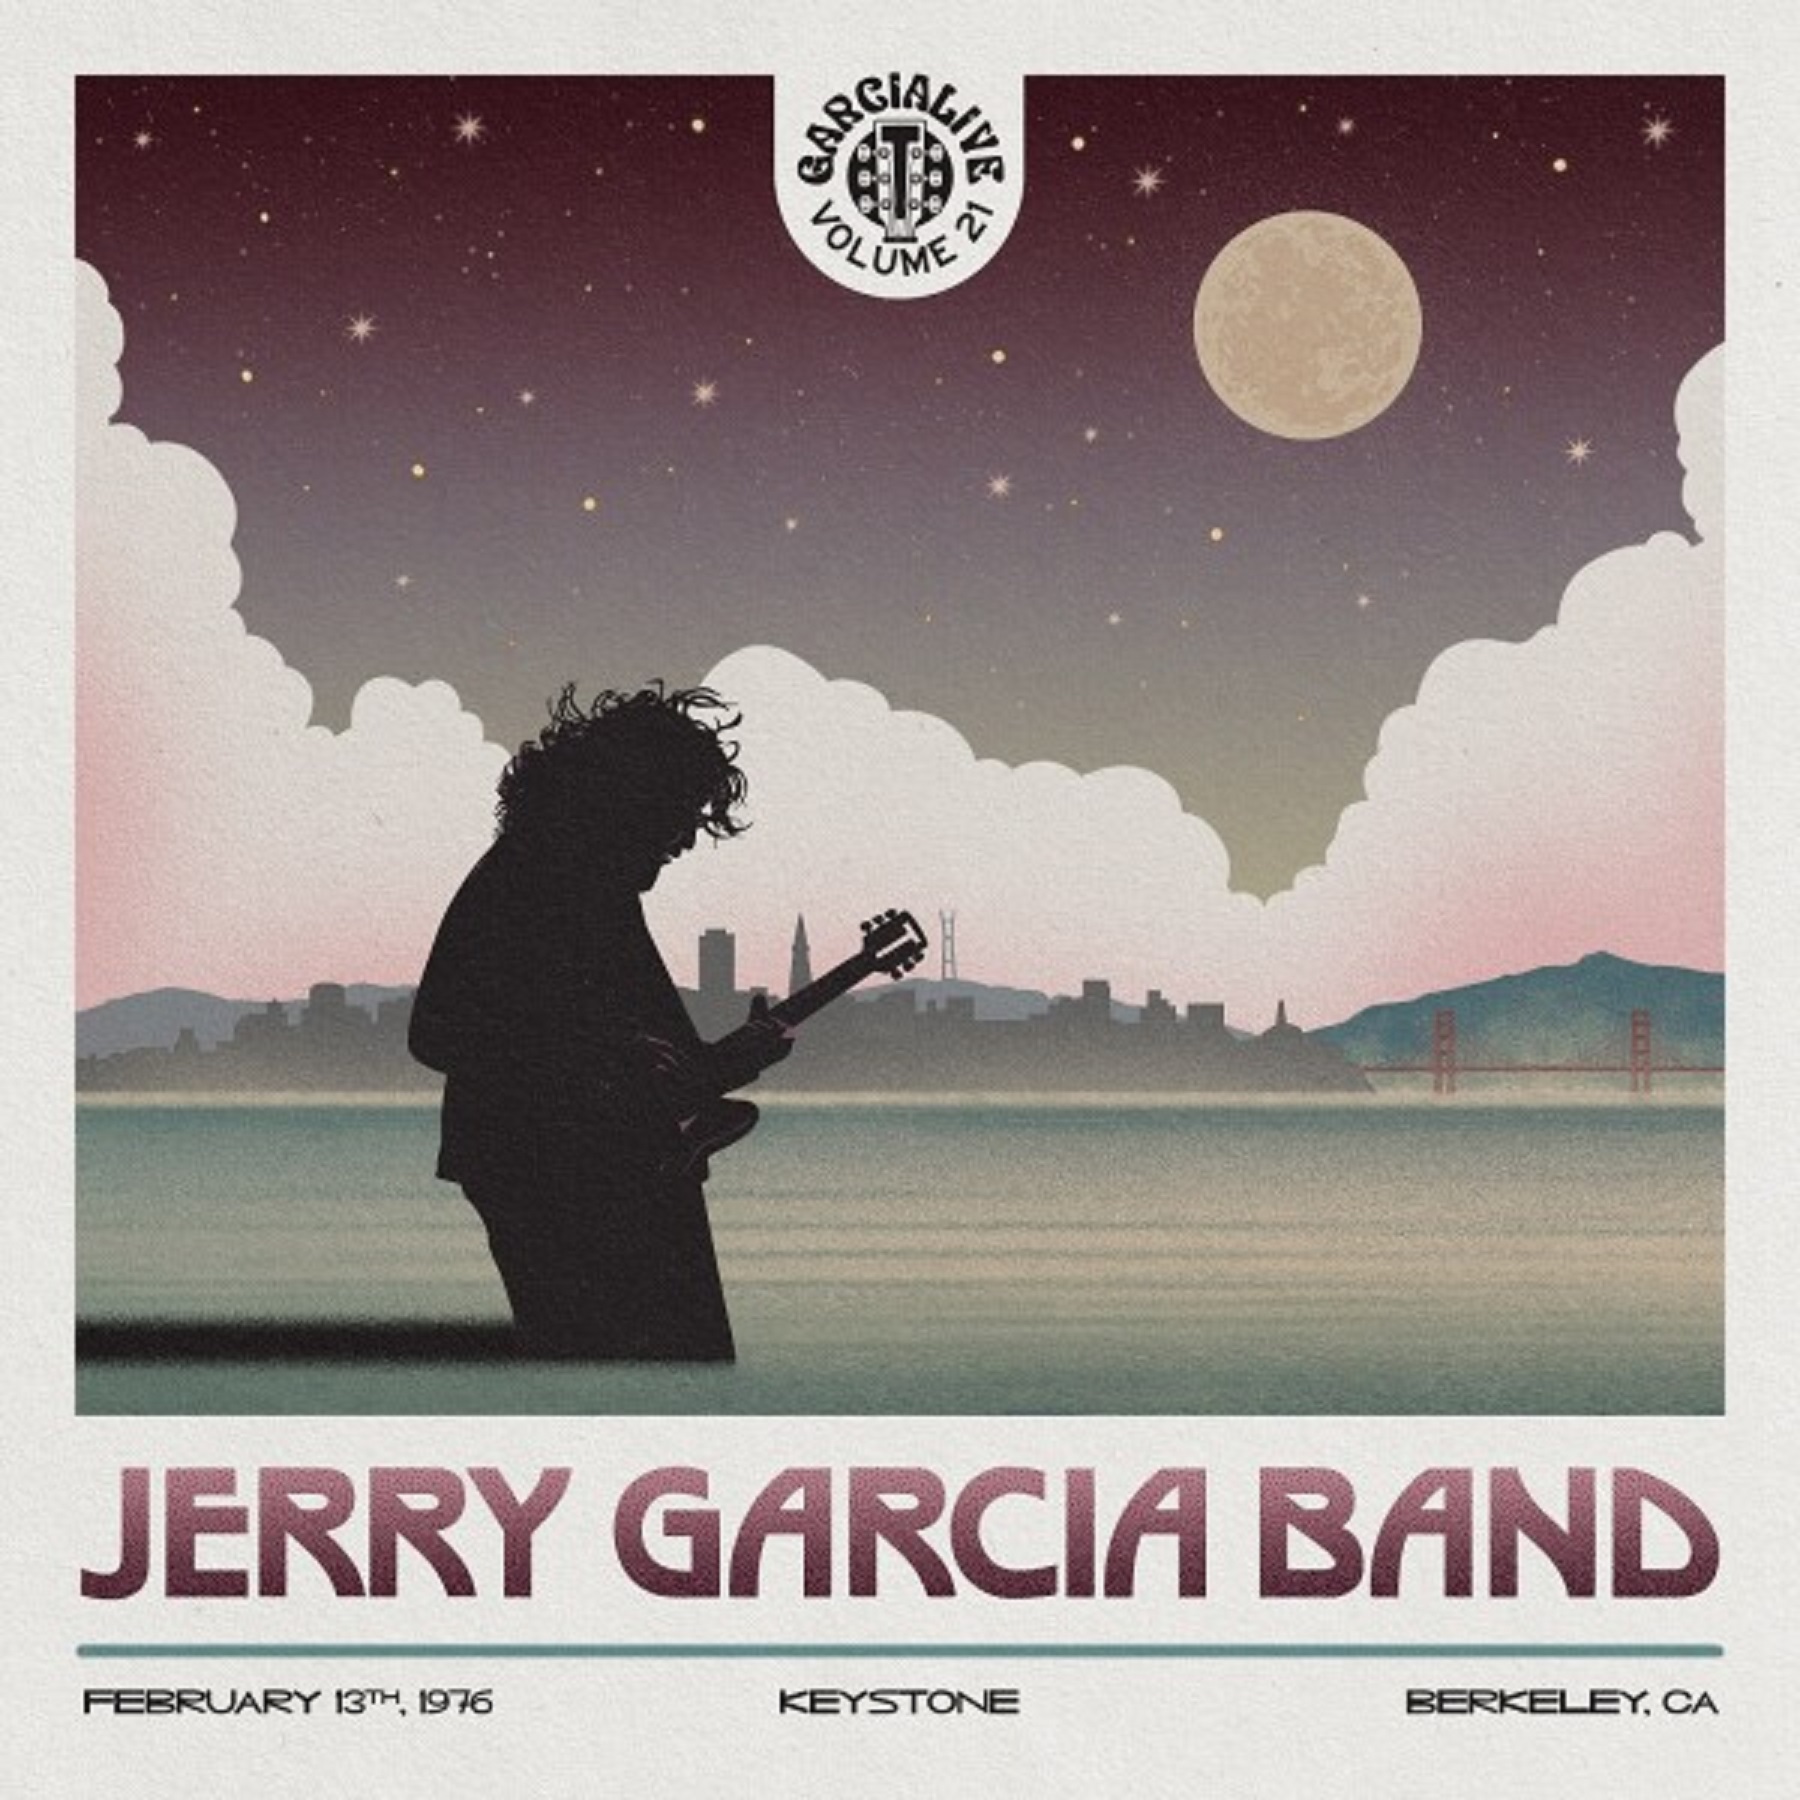 From the Vault: GarciaLive Volume 21 Features Jerry Garcia Band’s 1976 Keystone Concert